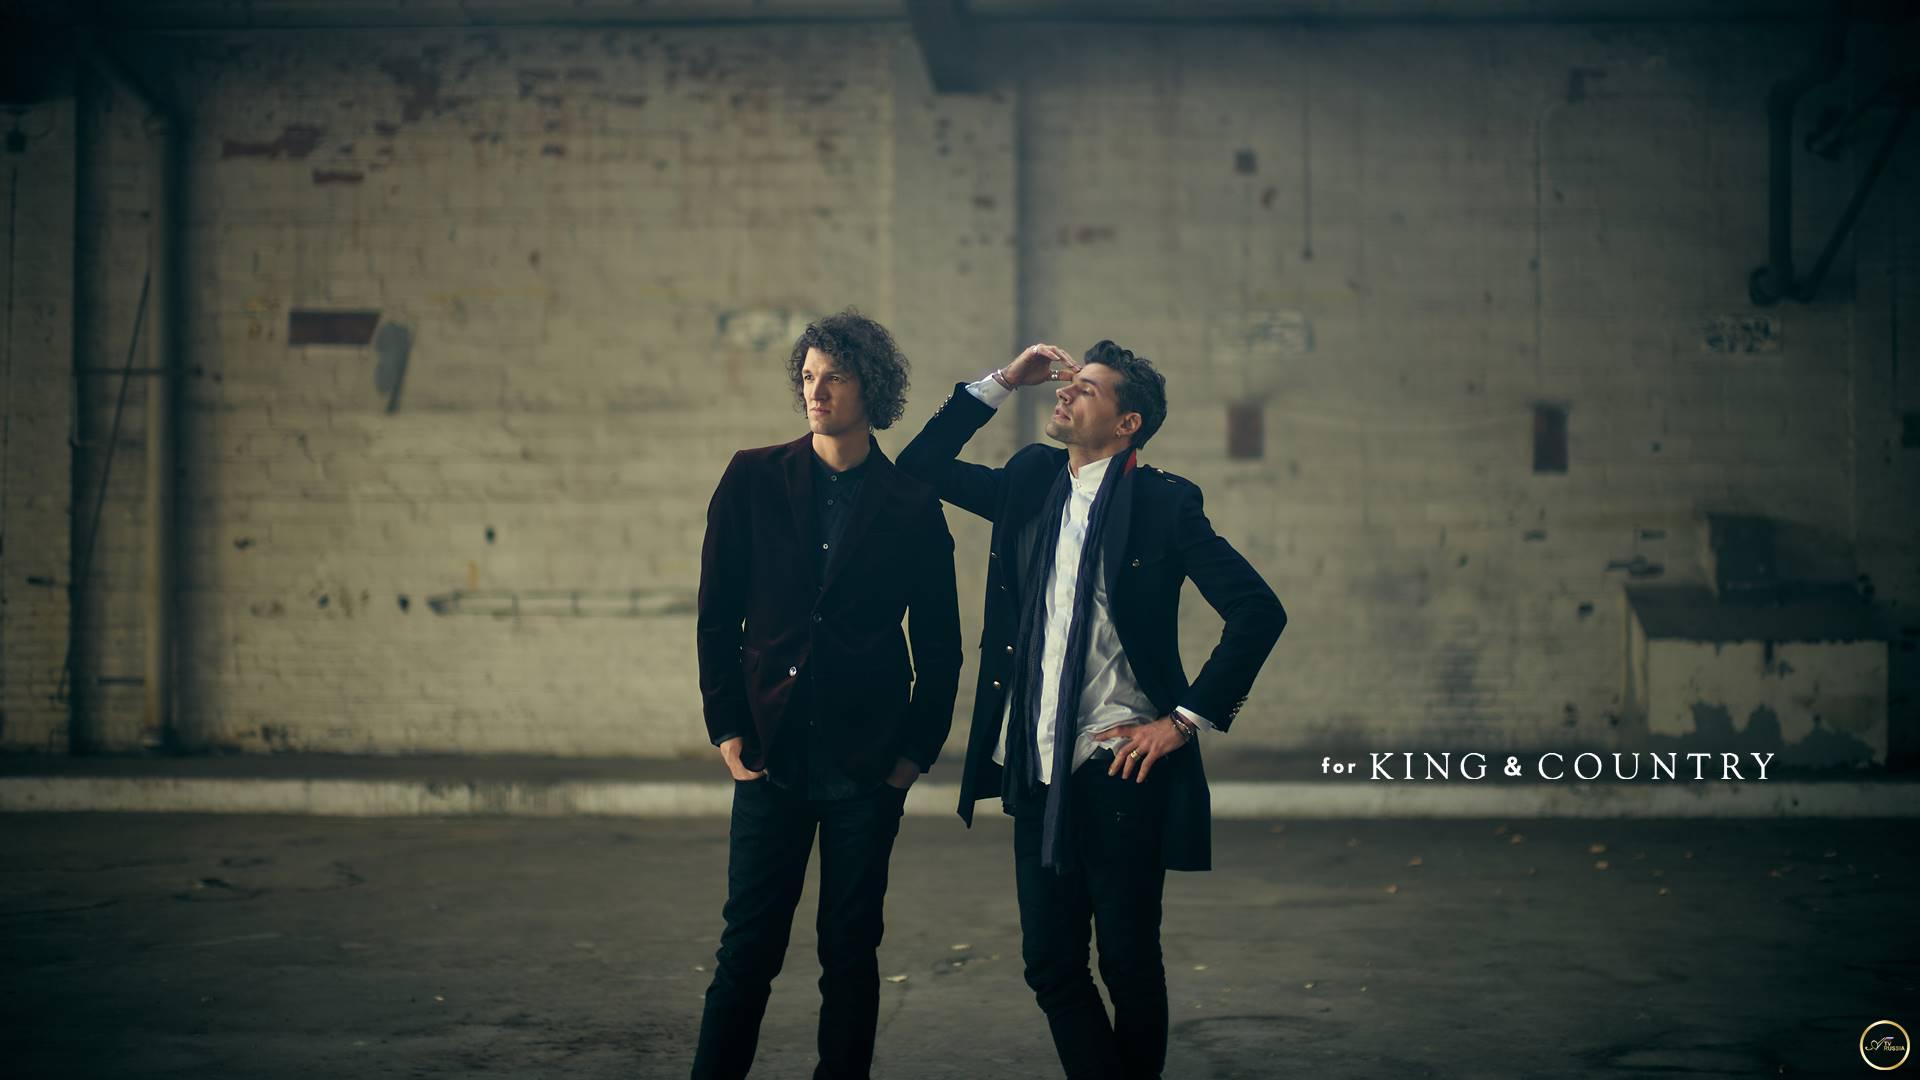 Wallpaper For King And Country For King & Country To Launch Holiday